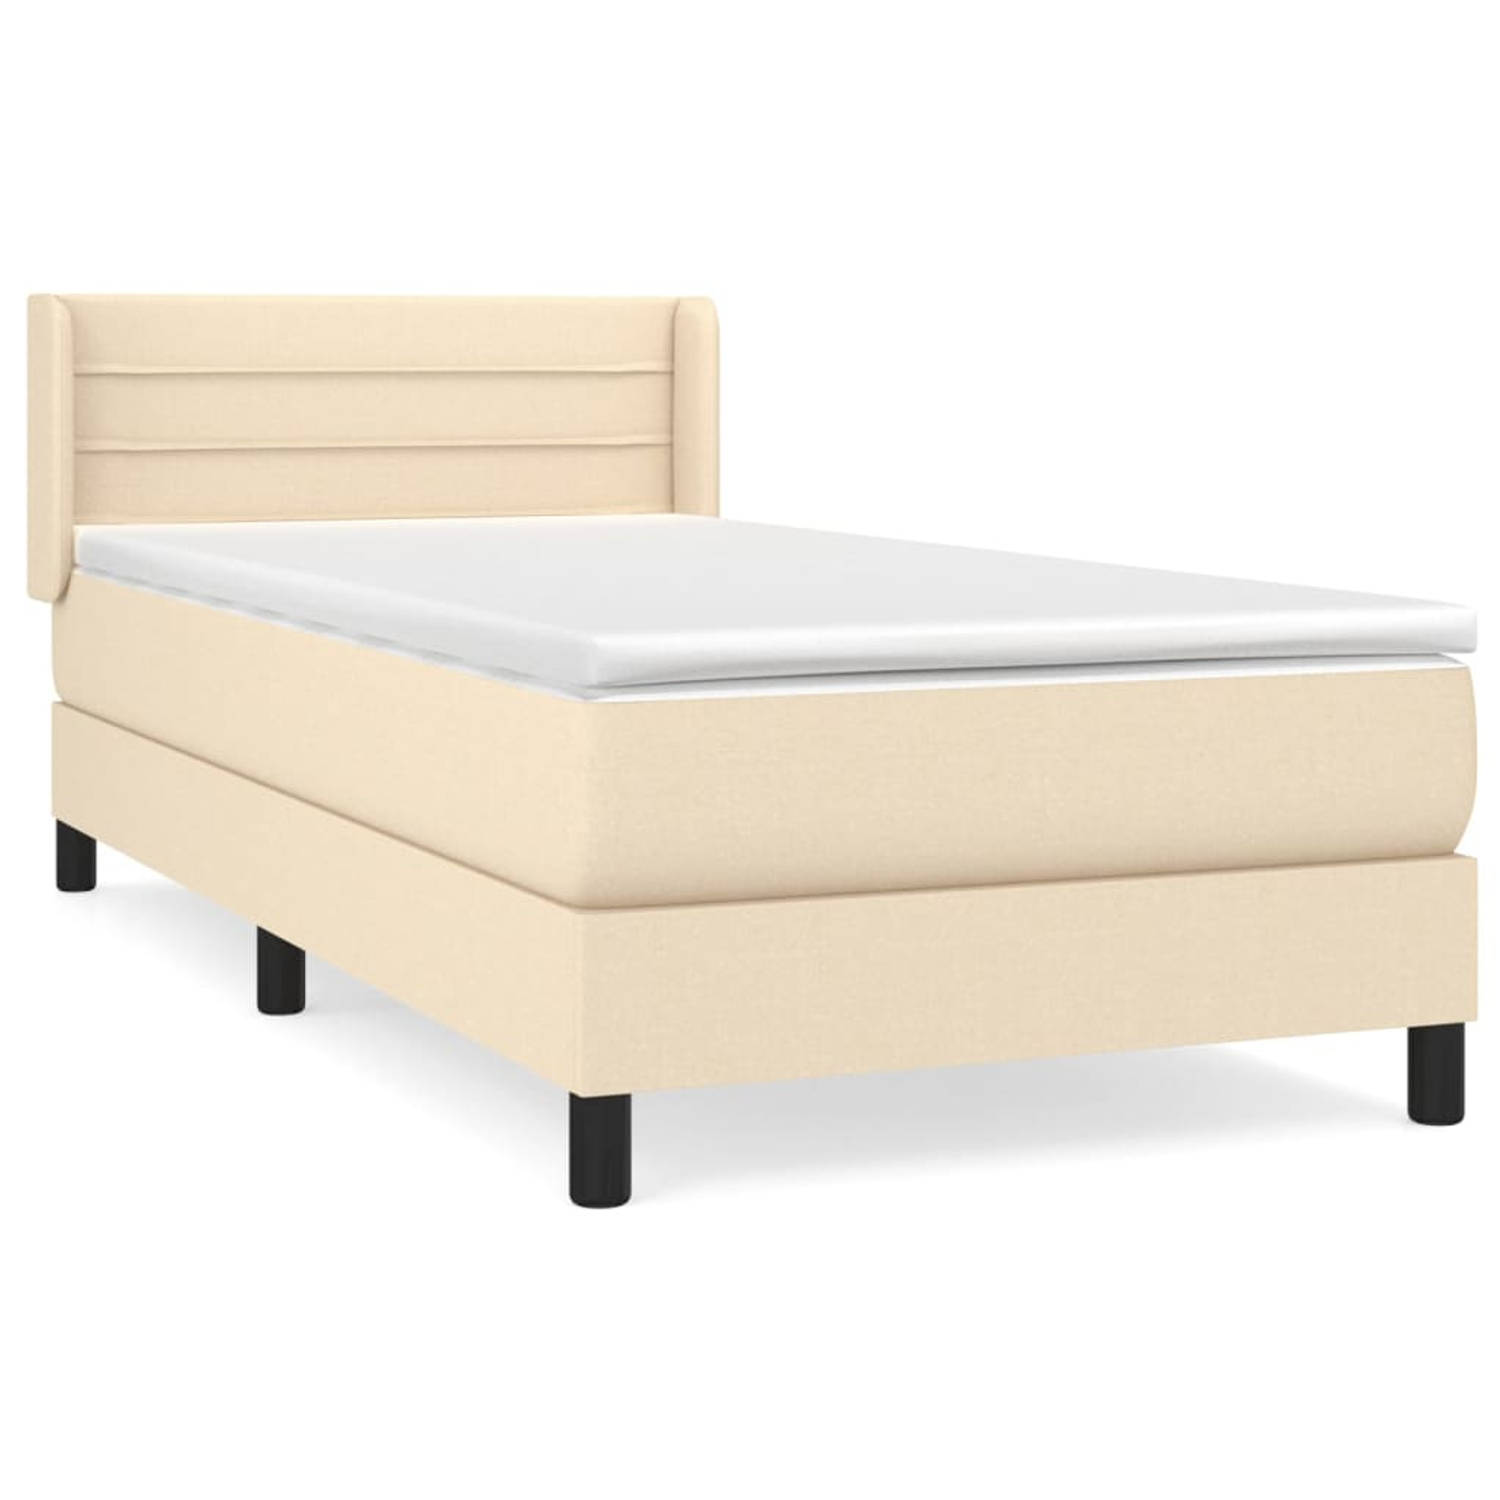 The Living Store Boxspringbed - Comfort - Bed - 203x93x78/88 cm - Crème